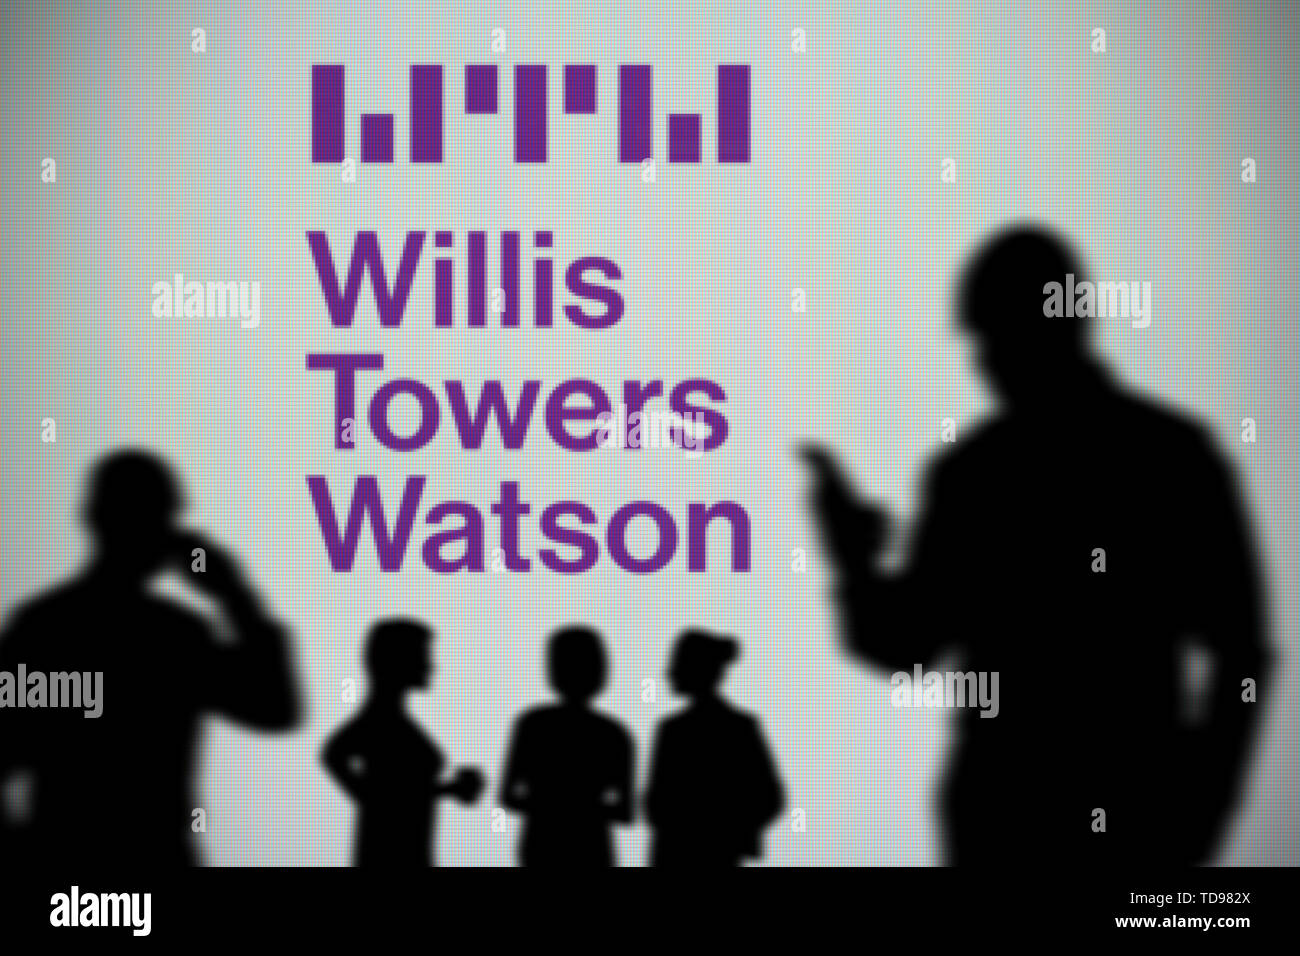 The Willis Towers Watson logo is seen on an LED screen in the background while a silhouetted person uses a smartphone (Editorial use only) Stock Photo